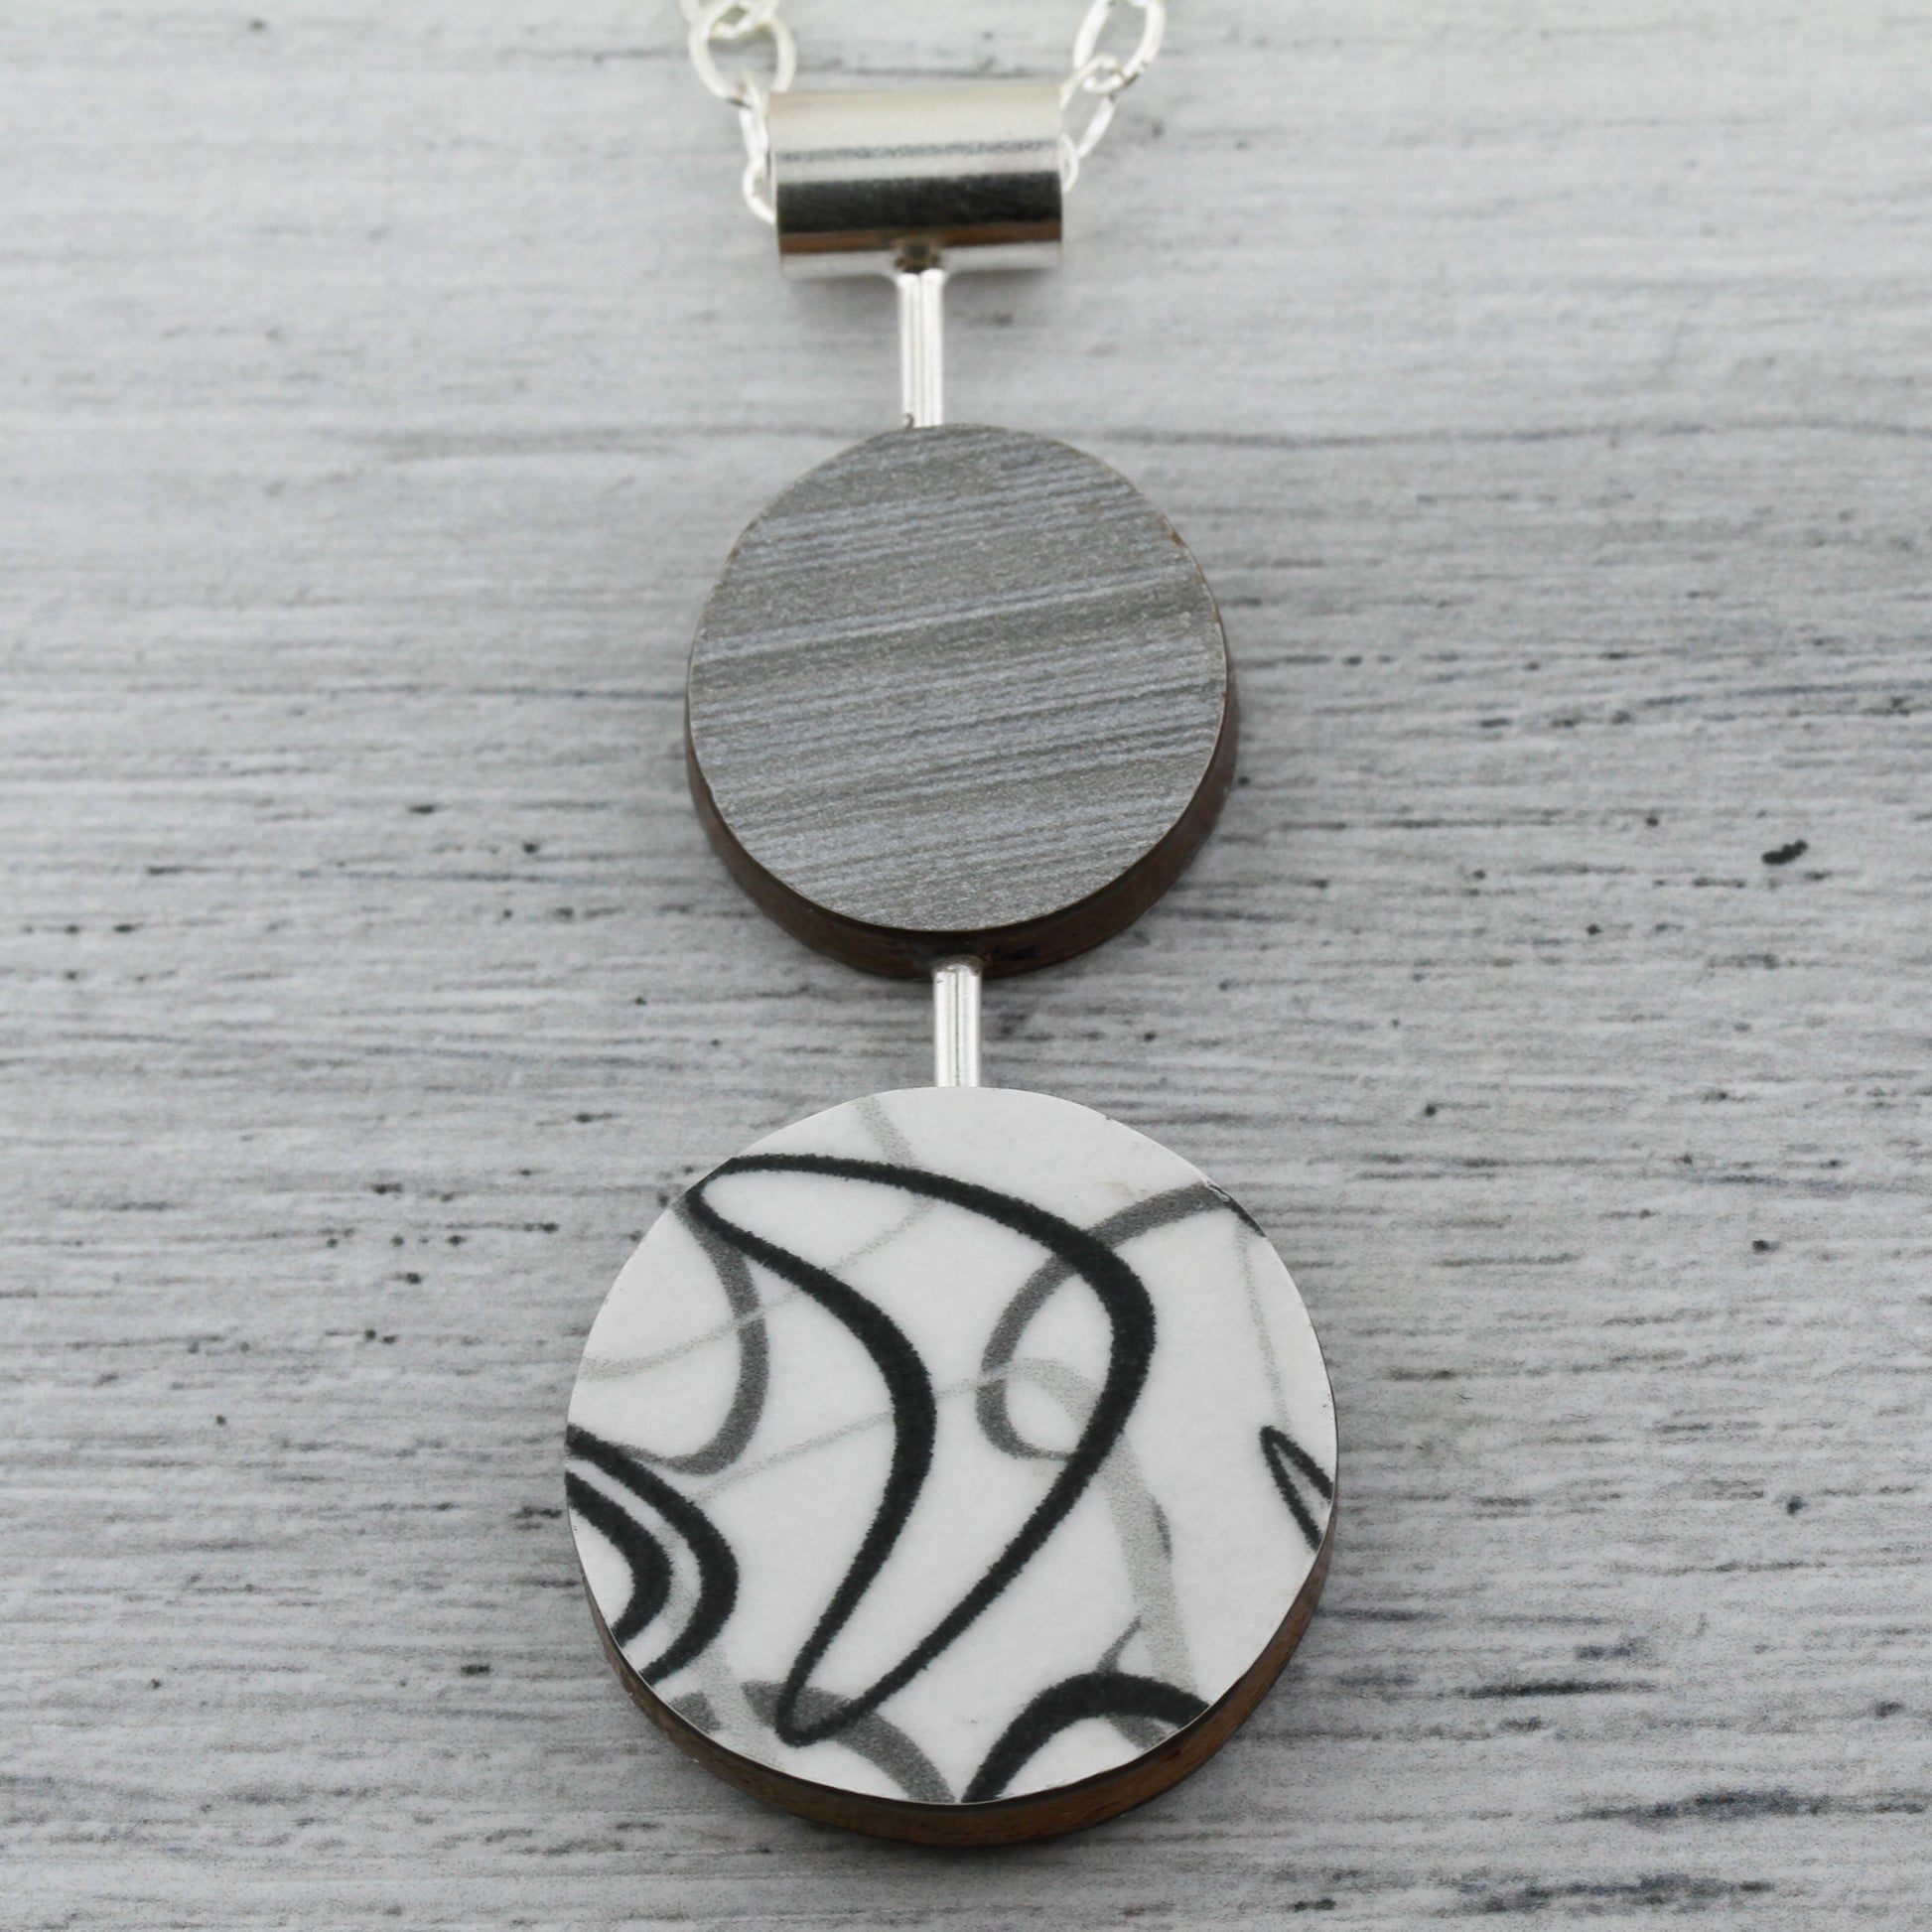 Laminate on wood necklace contemporary modern jewelry.